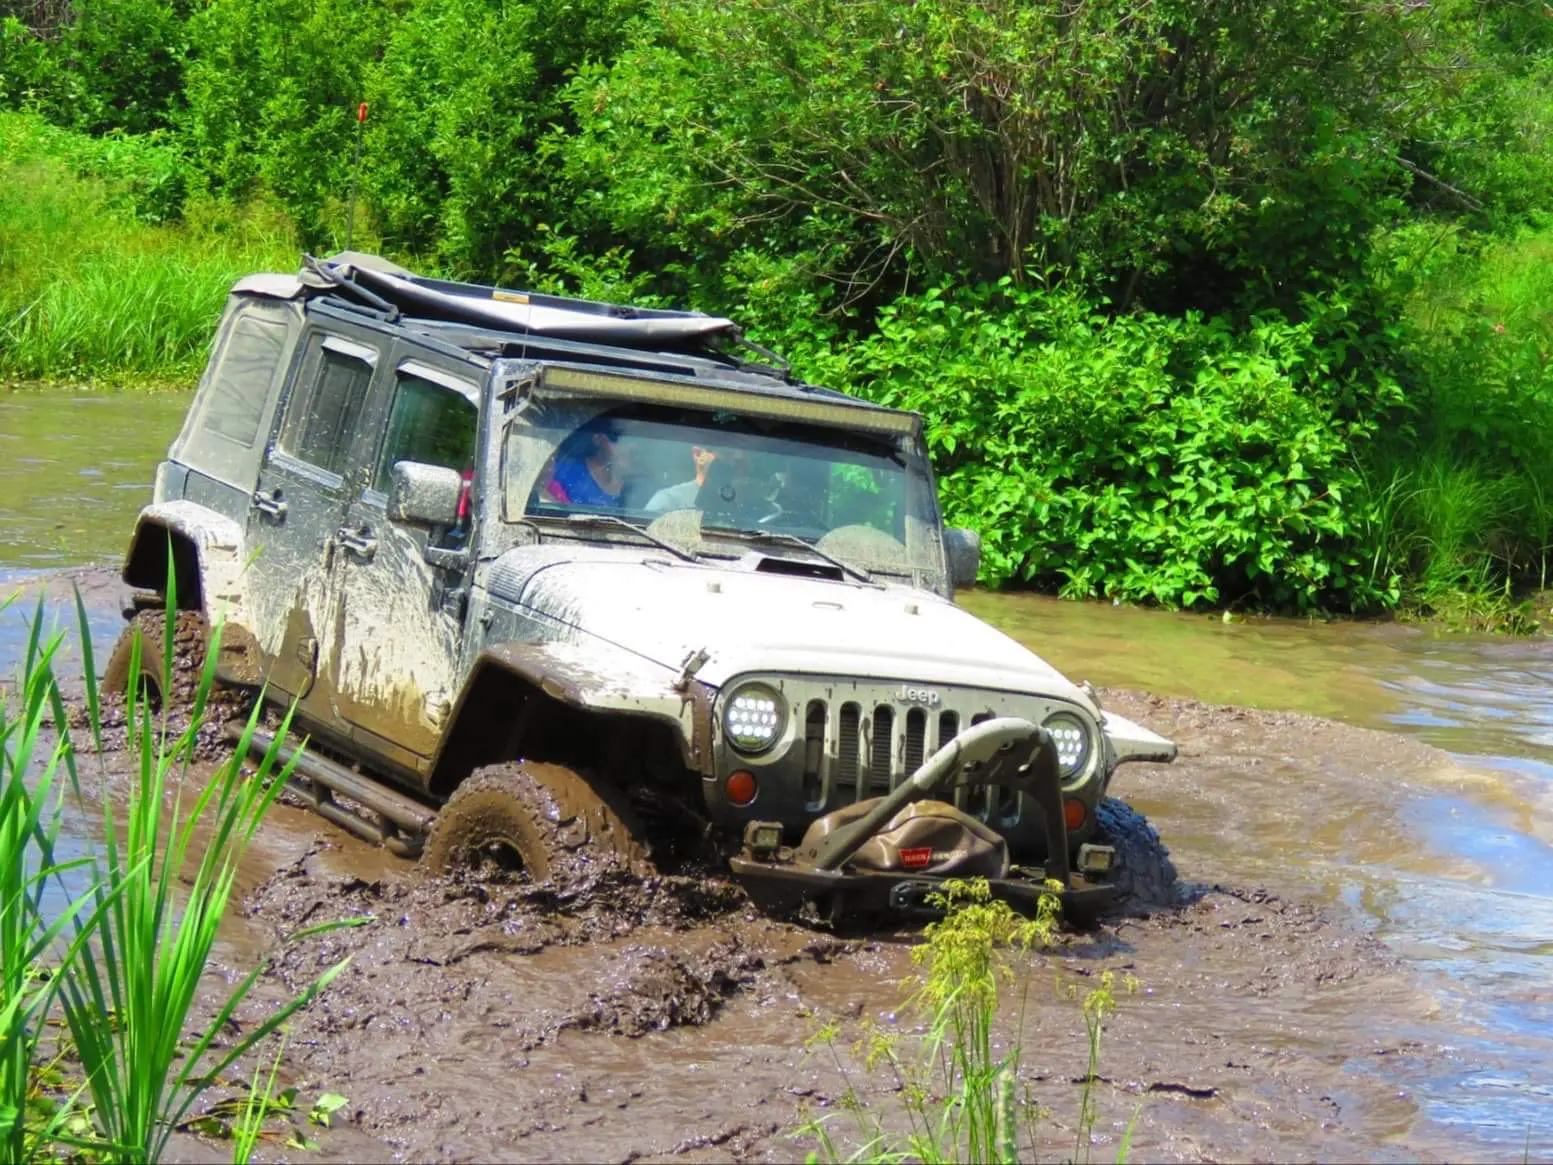 Jeep off road